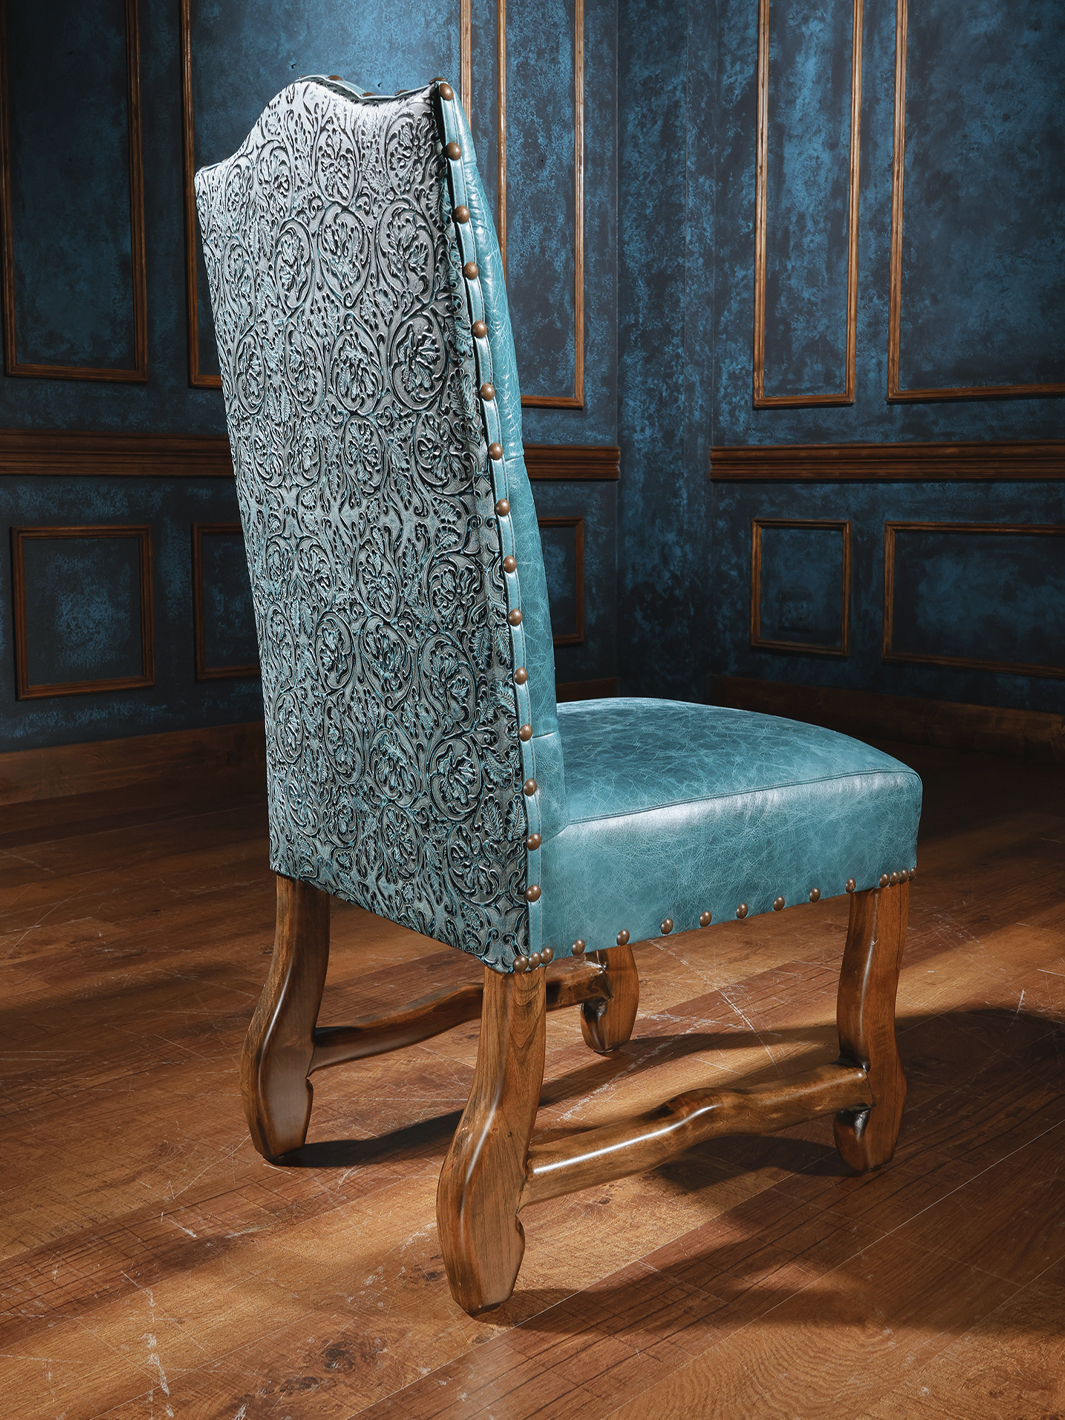 Upholstered Antique Dining Chair Repurposed in Turquoise and 